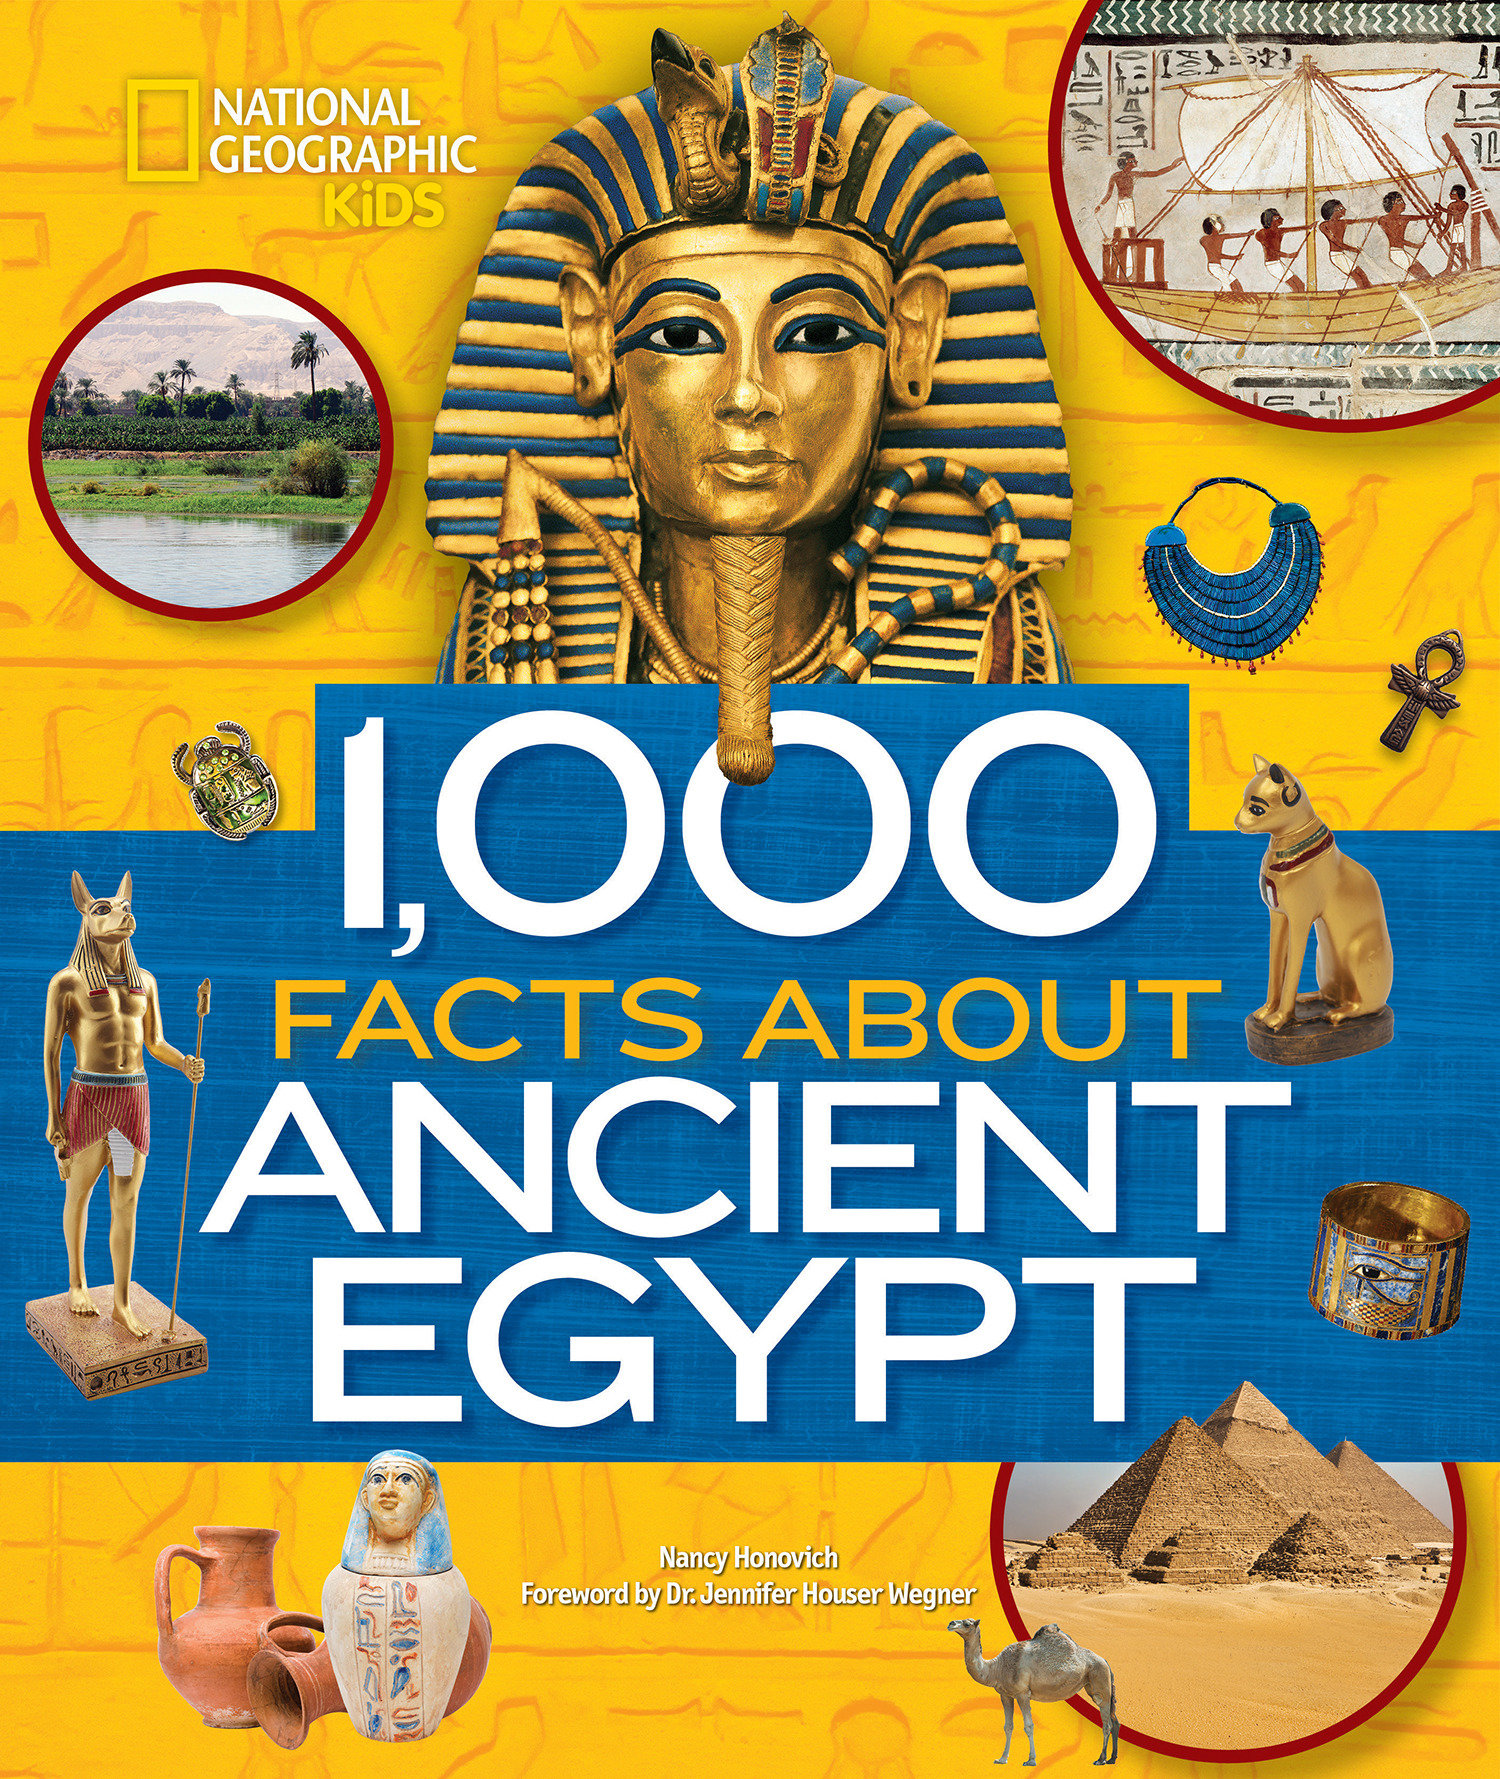 1,000 Facts About Ancient Egypt (Hardcover Book)